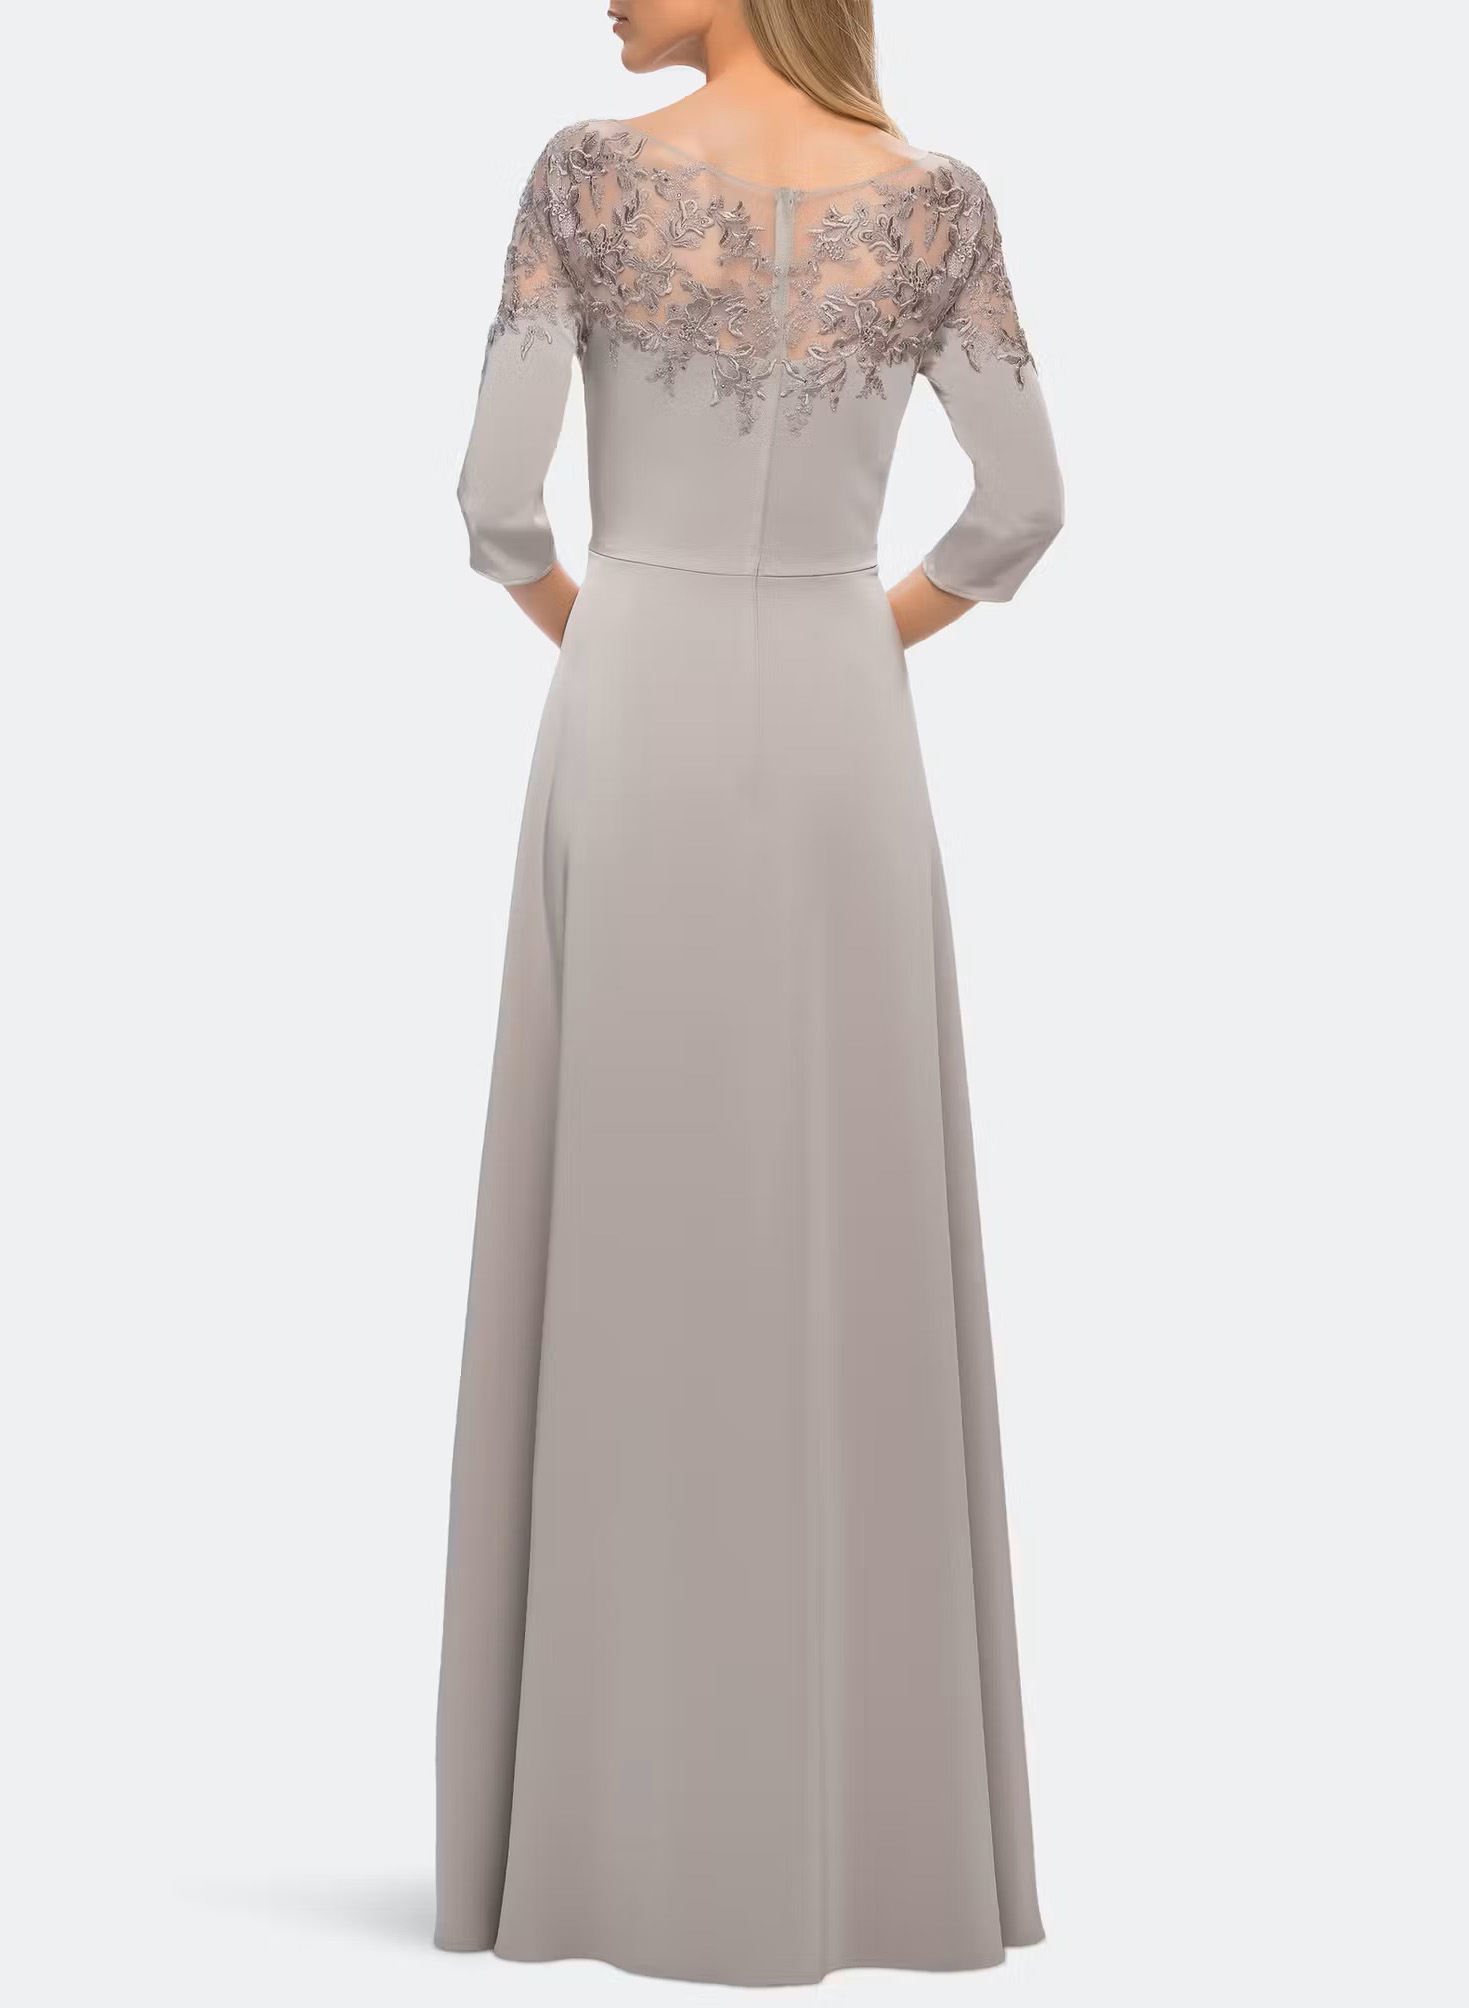 Elegant Lace Sleeves A-Line Mother Of The Bride Dresses